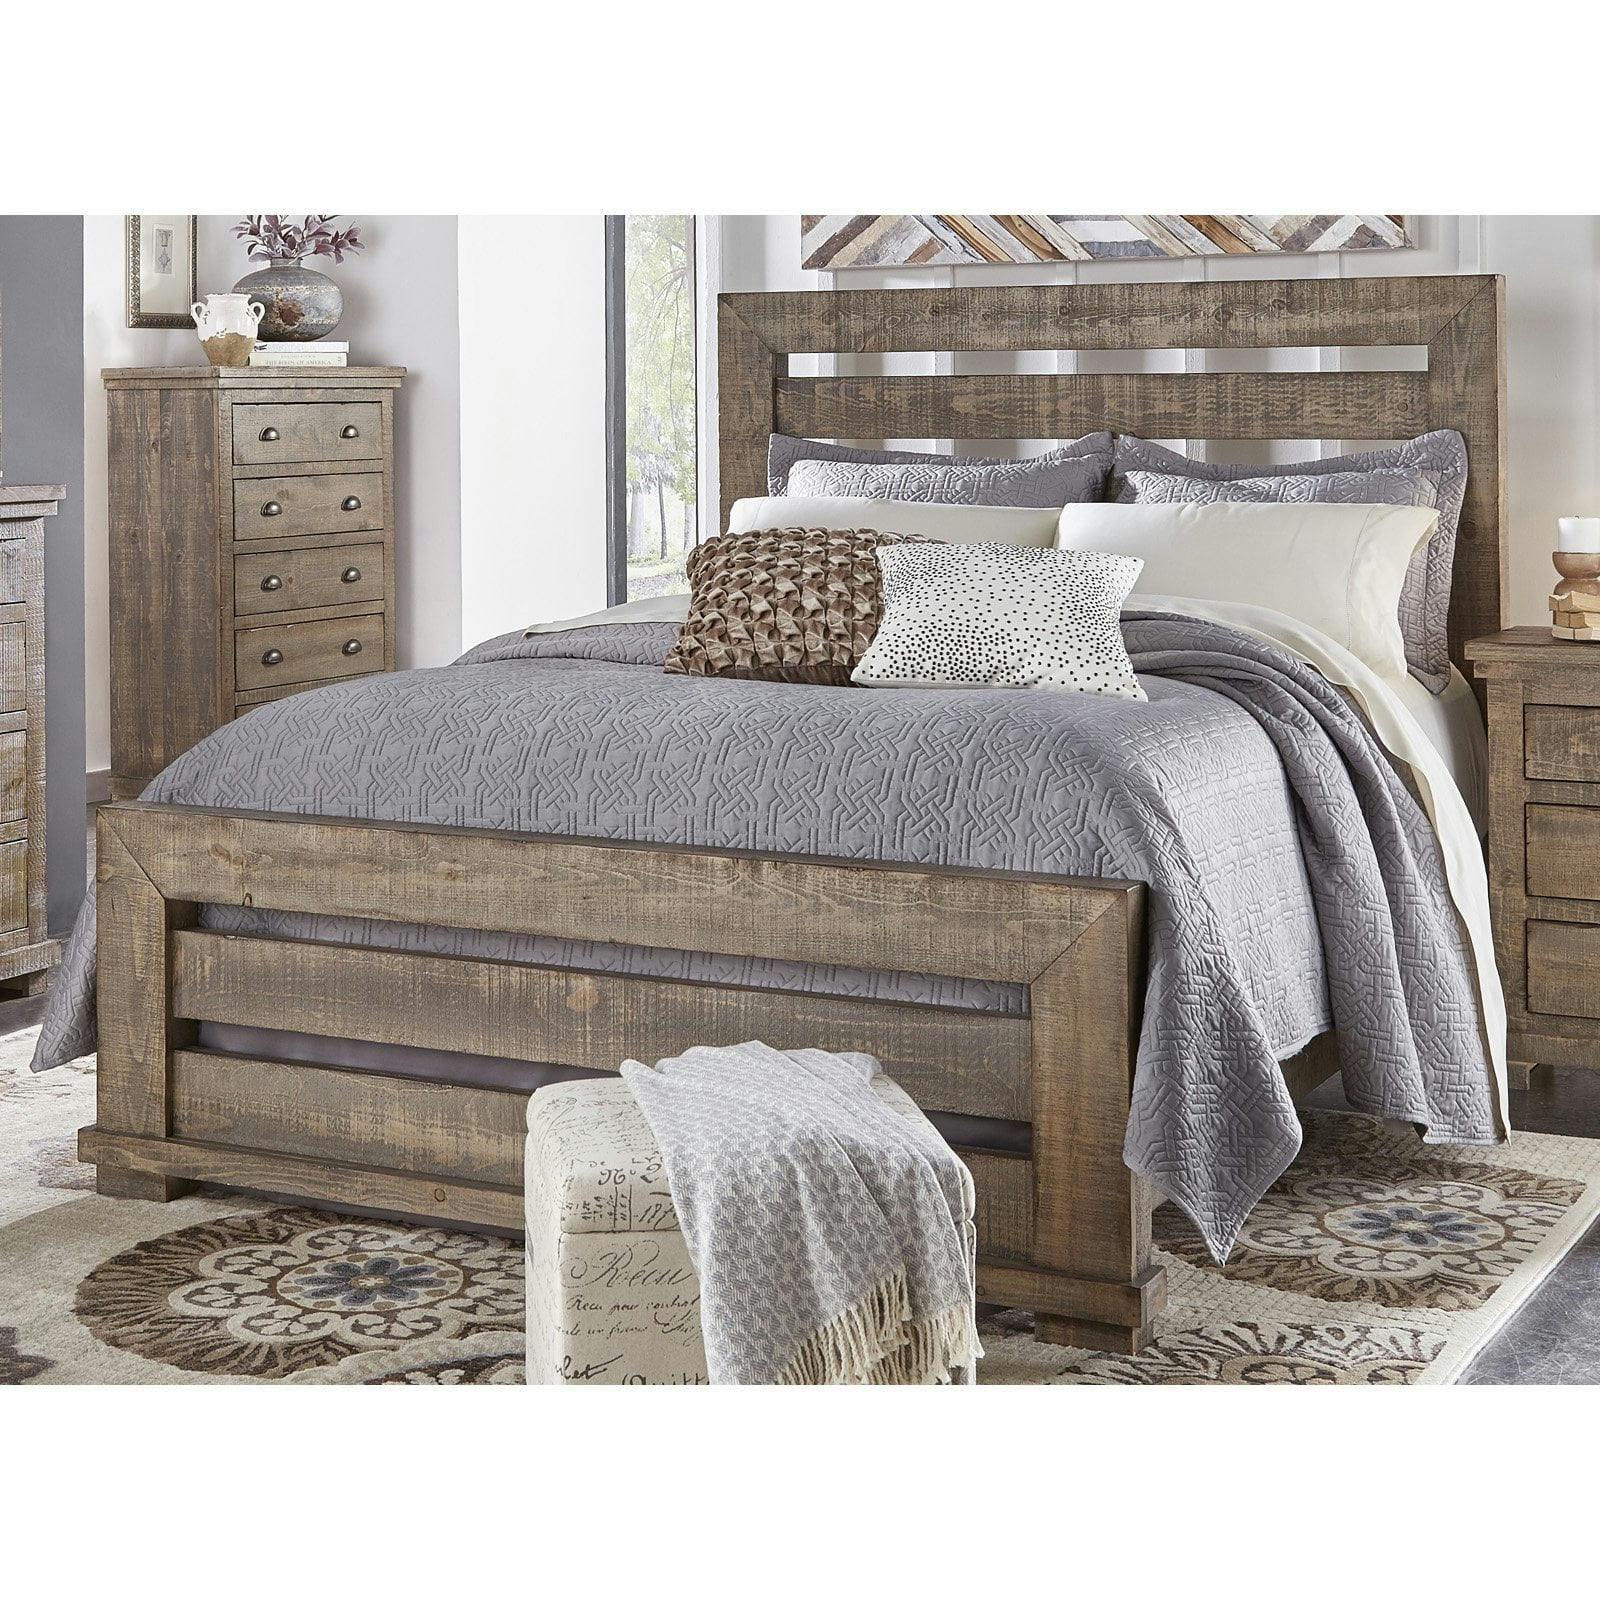 Rustic Pine Queen Panel Bed with Upholstered Headboard and Storage